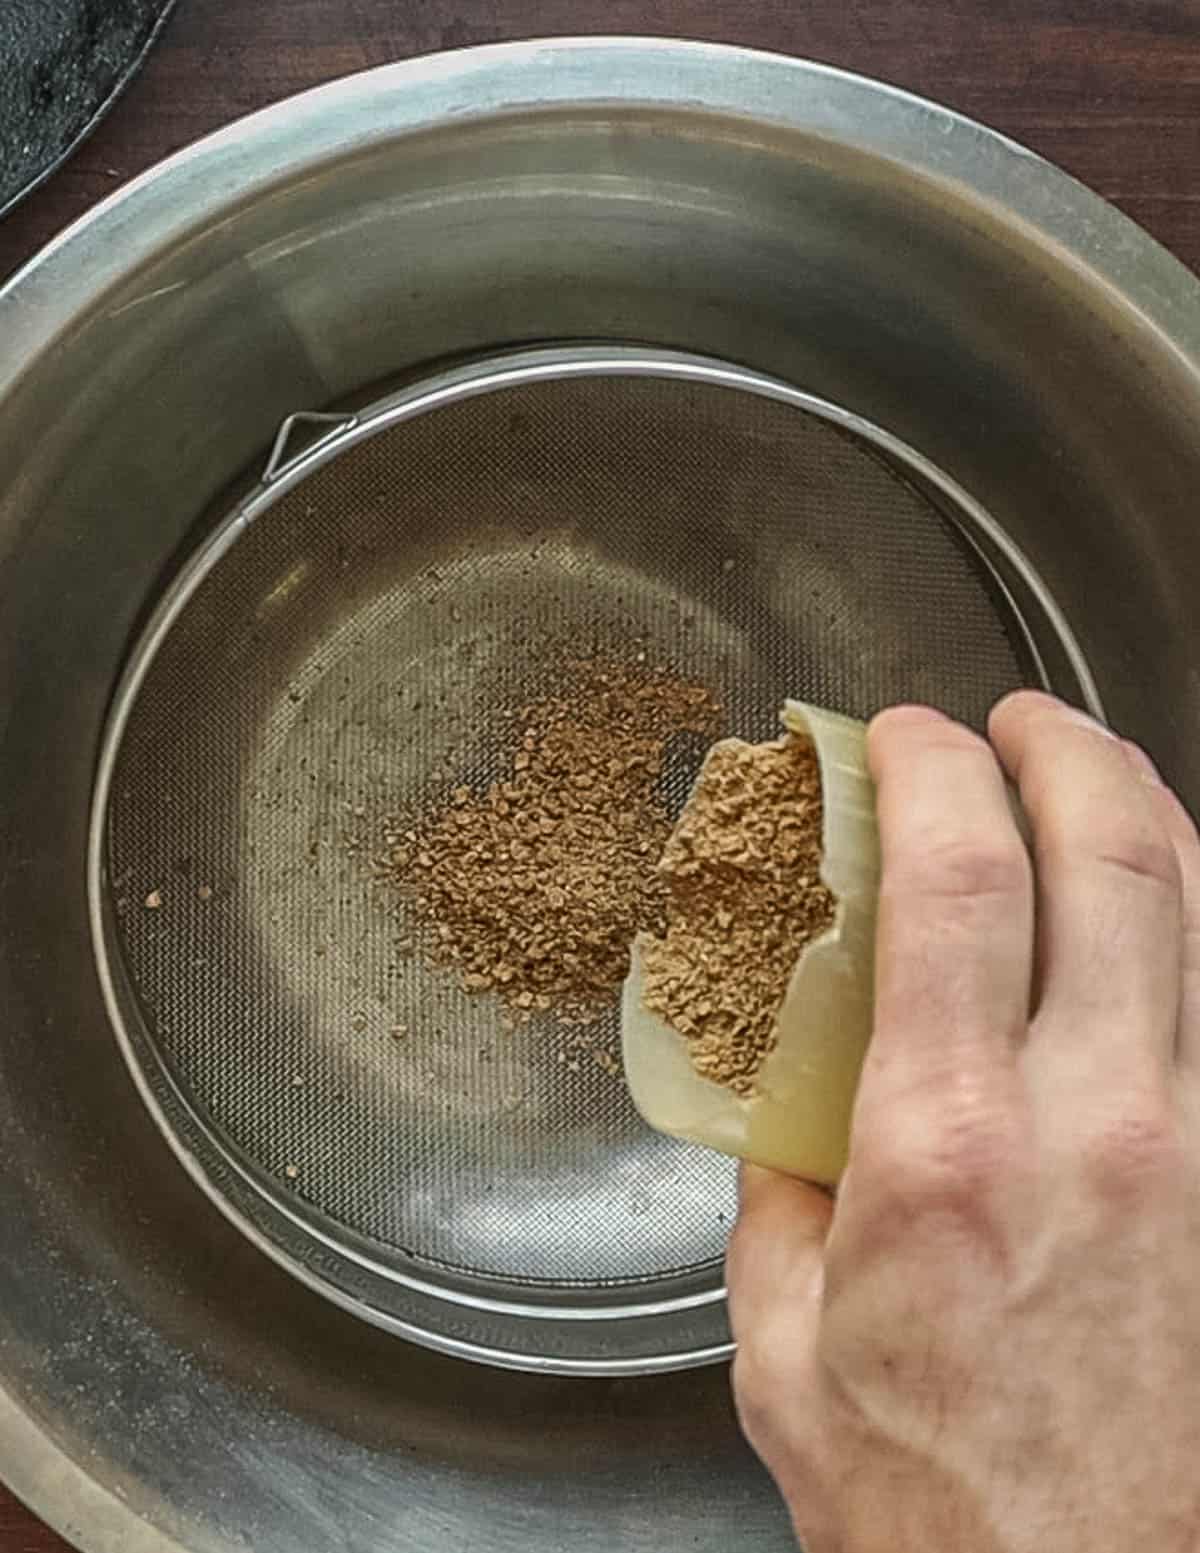 Sifting ground, roasted linden seeds through a tamis sieve. 